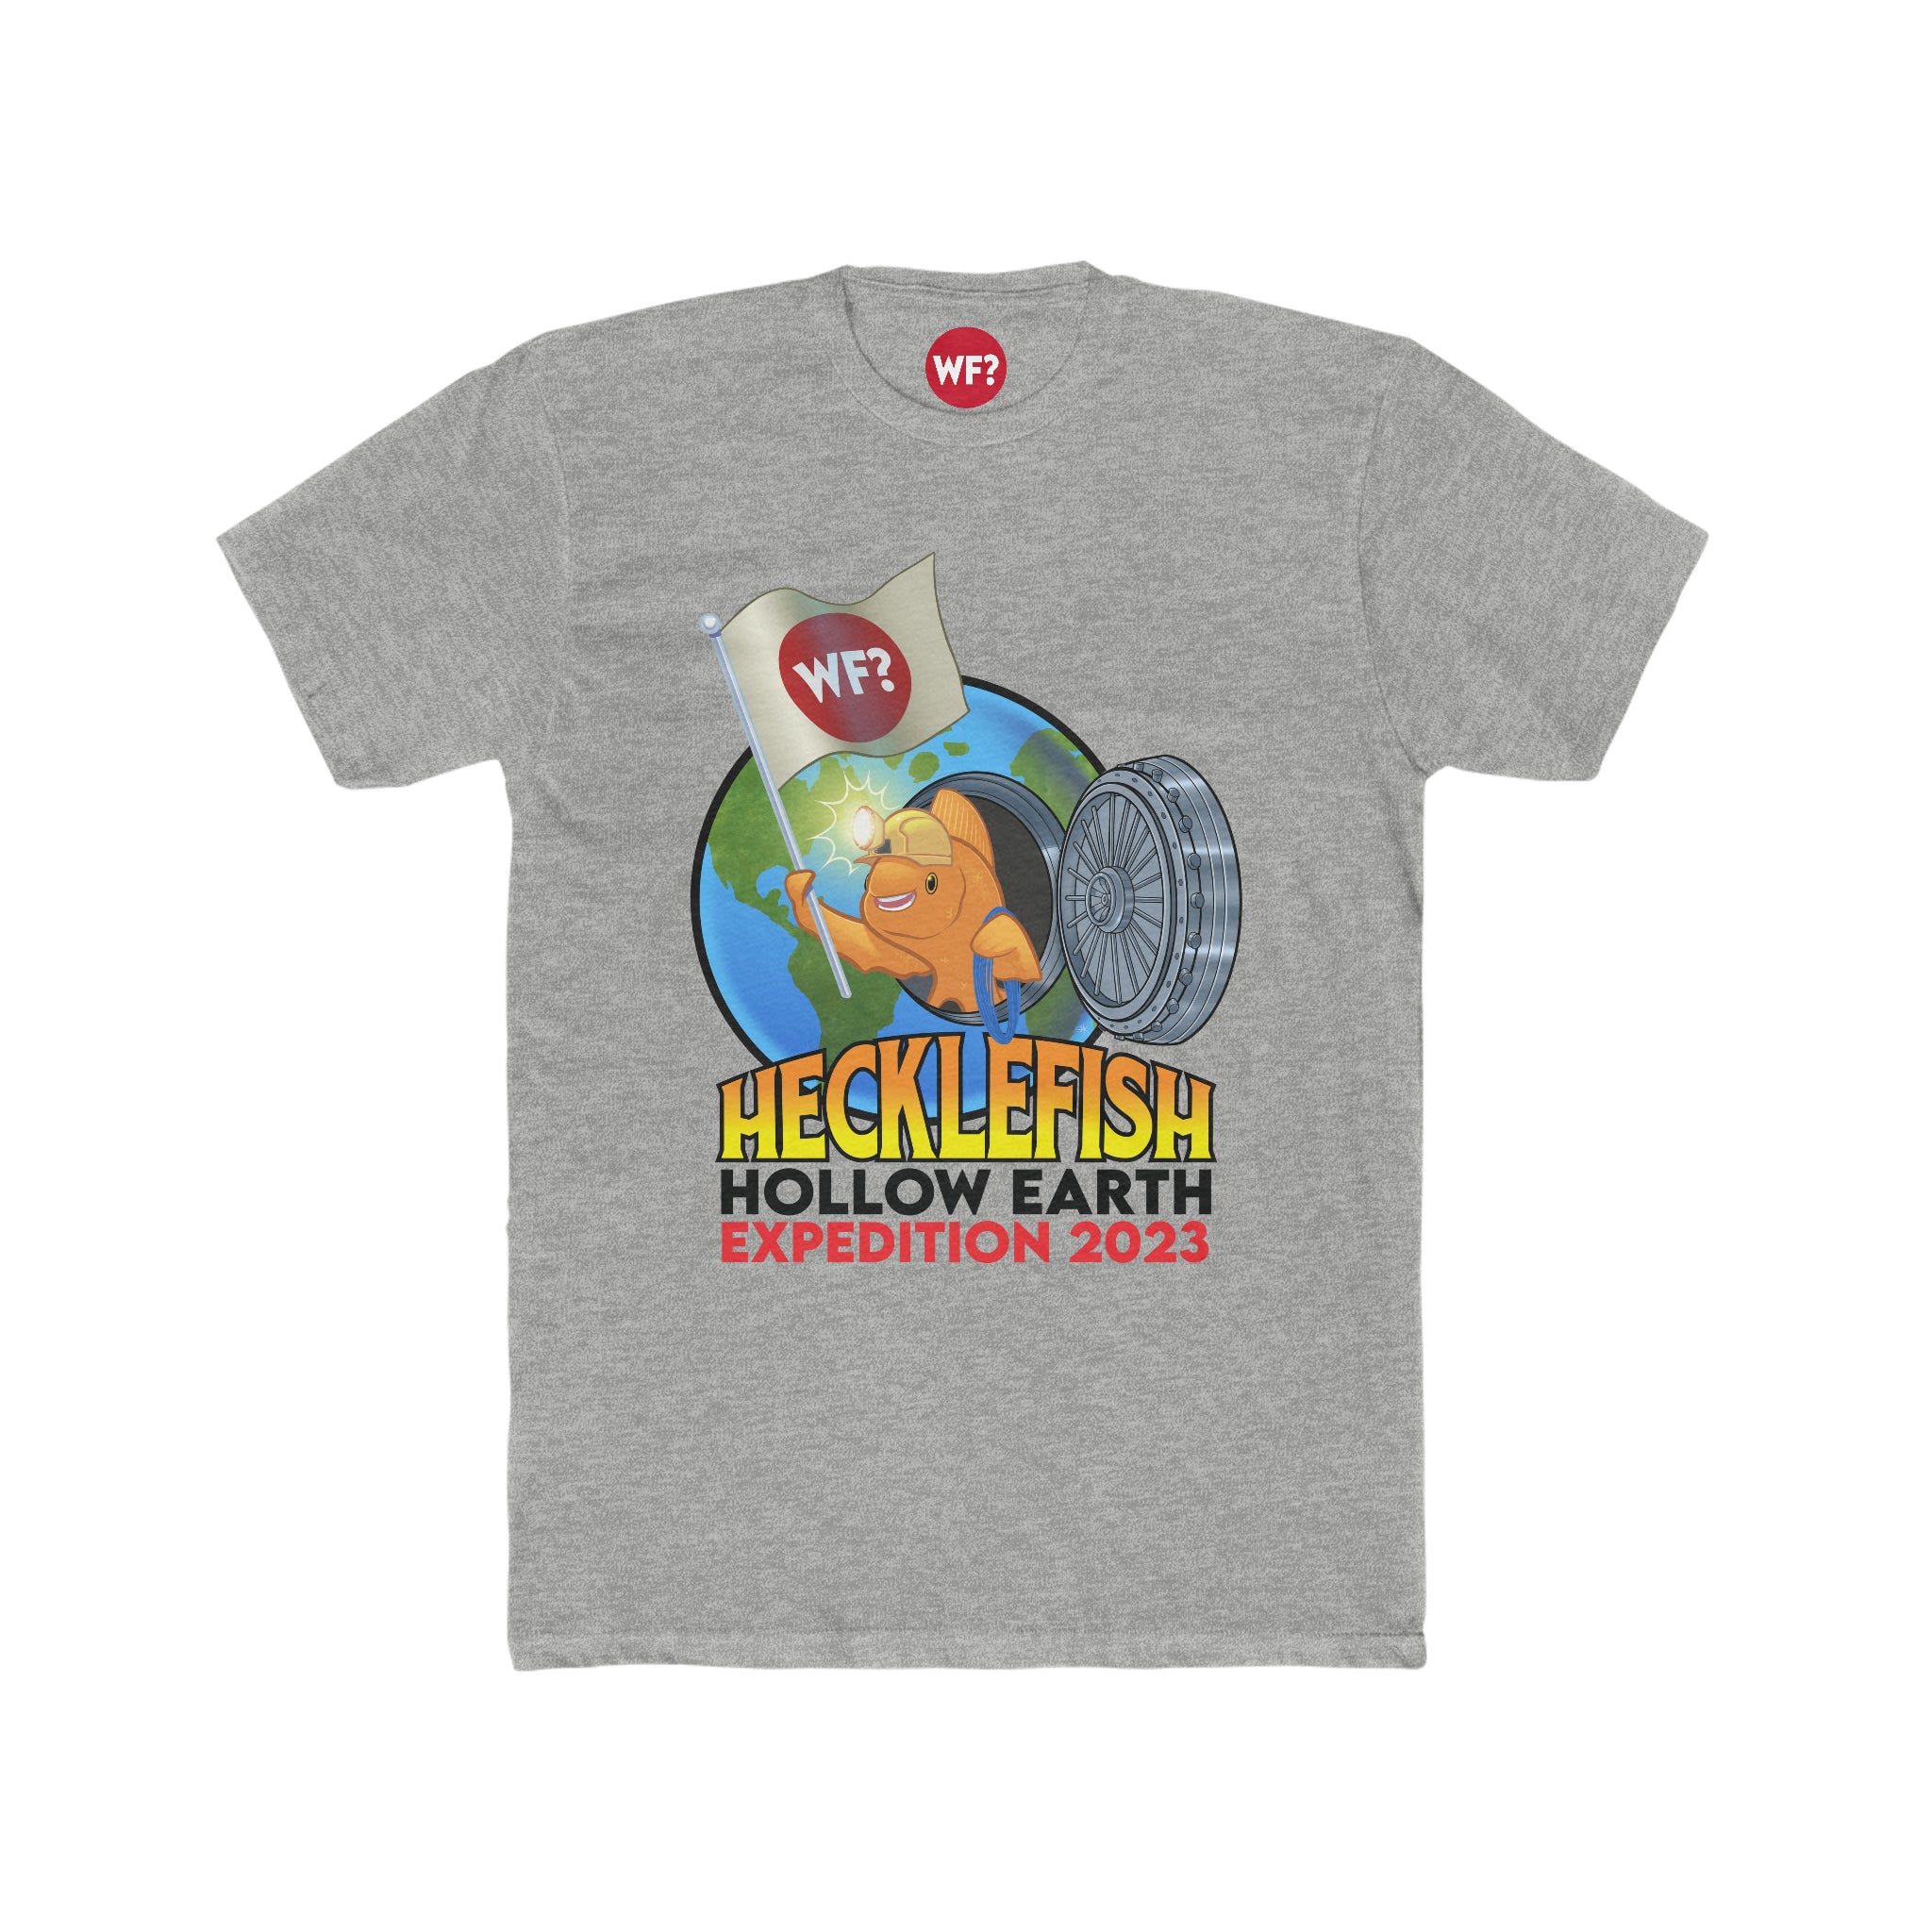 Buy heather-grey Hollow Earth Limited T-Shirt